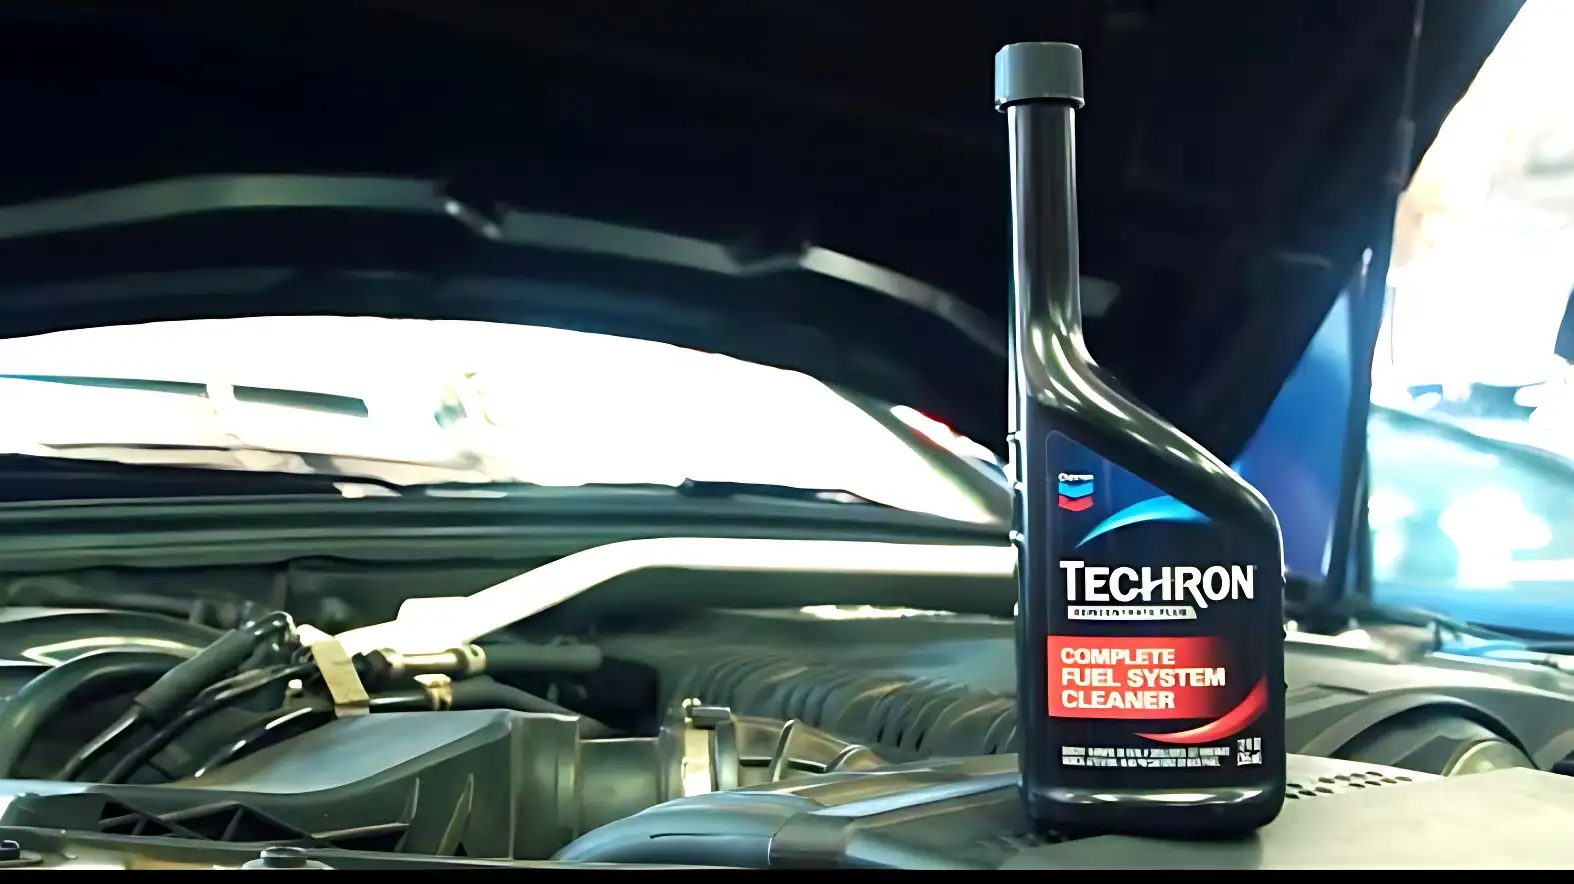 How To Use Techron Fuel System Cleaner